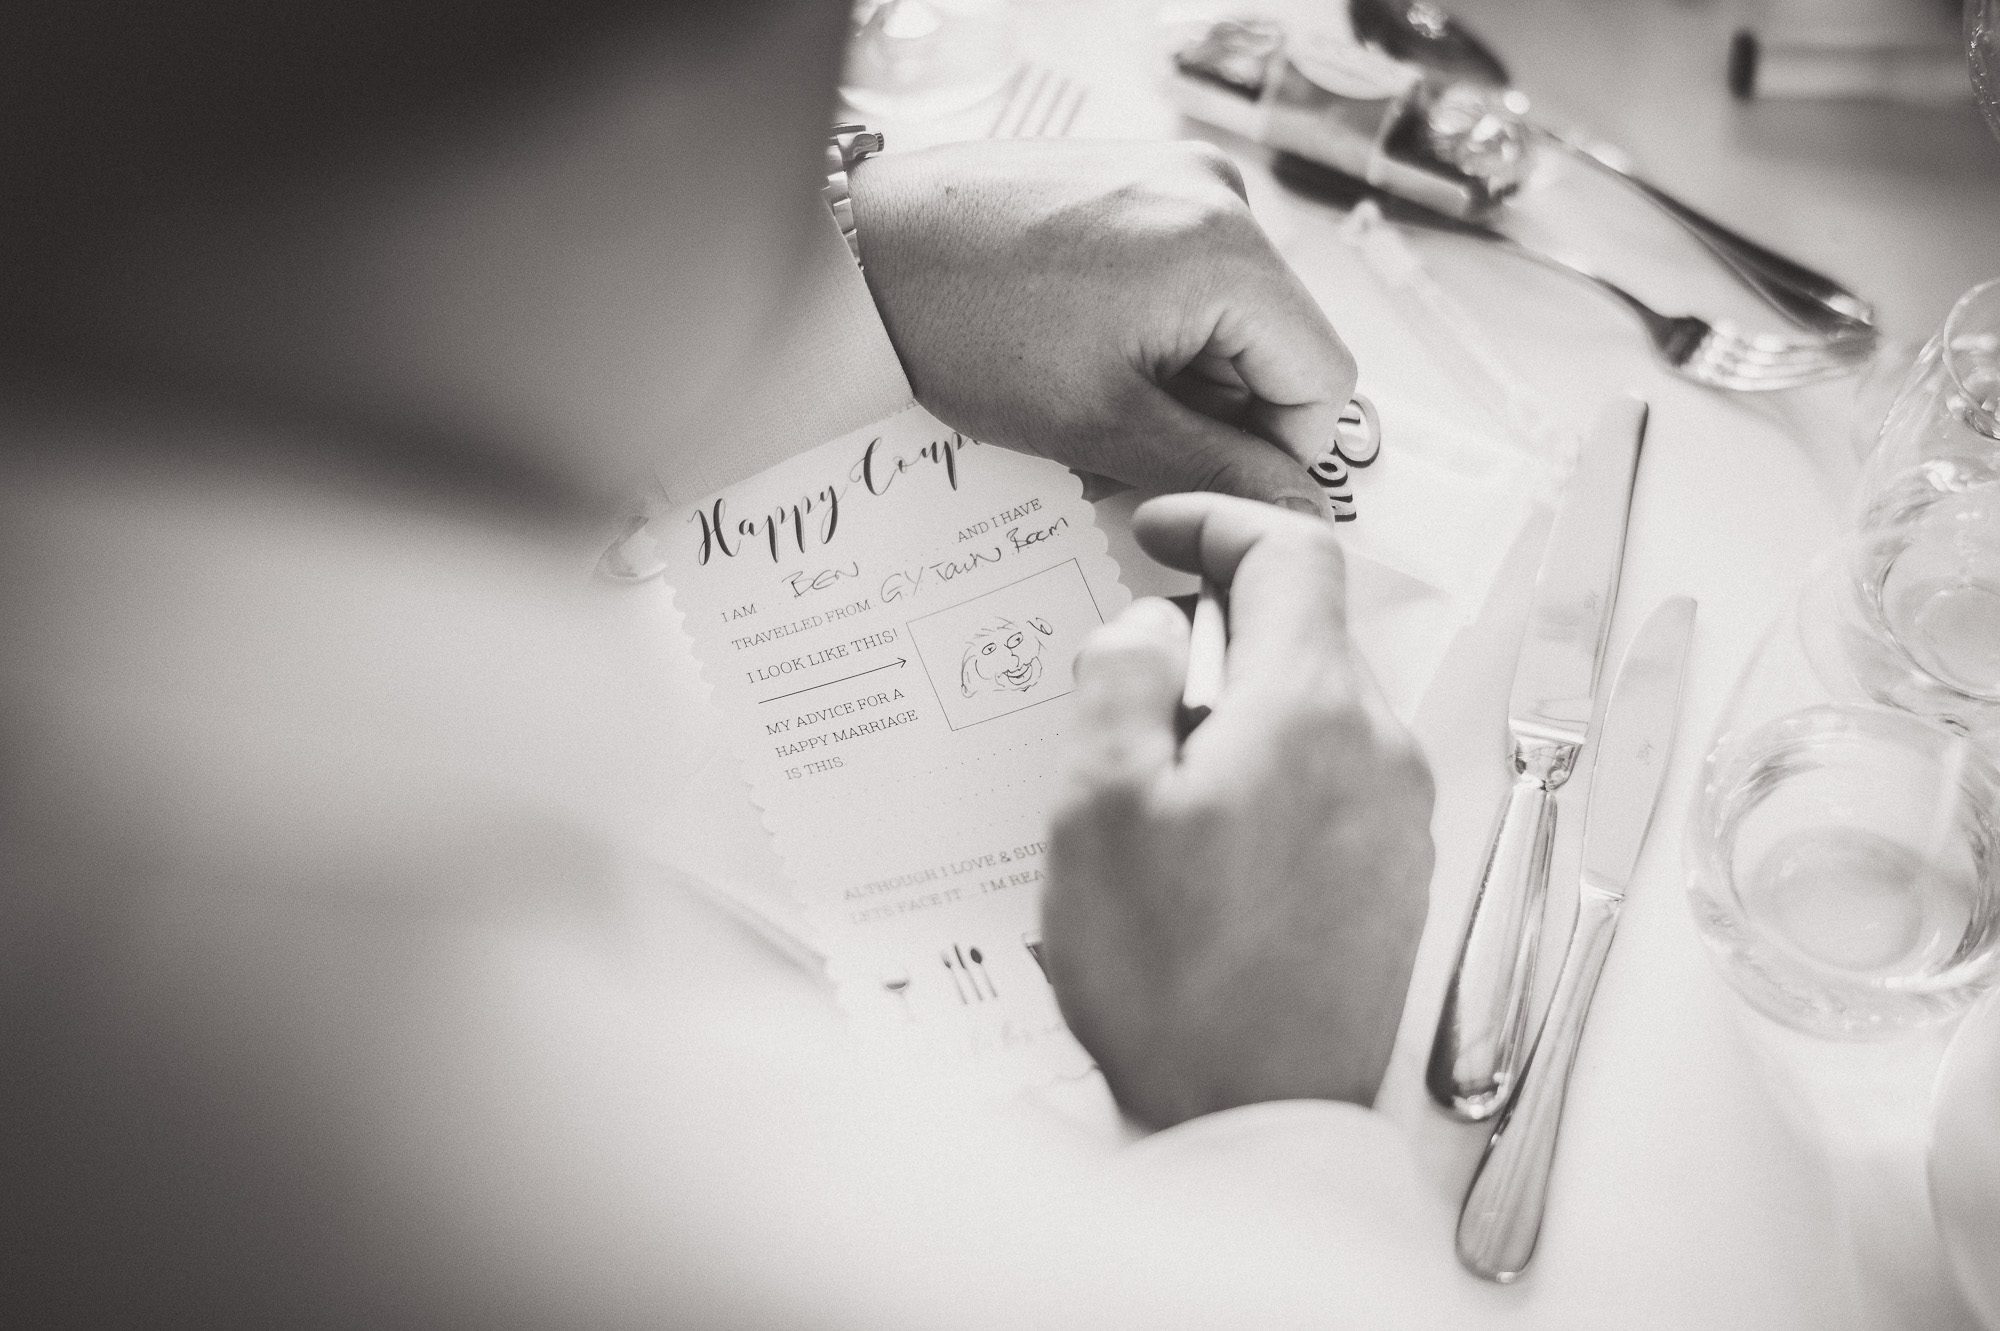 A black and white photo of a groom writing on a piece of paper.